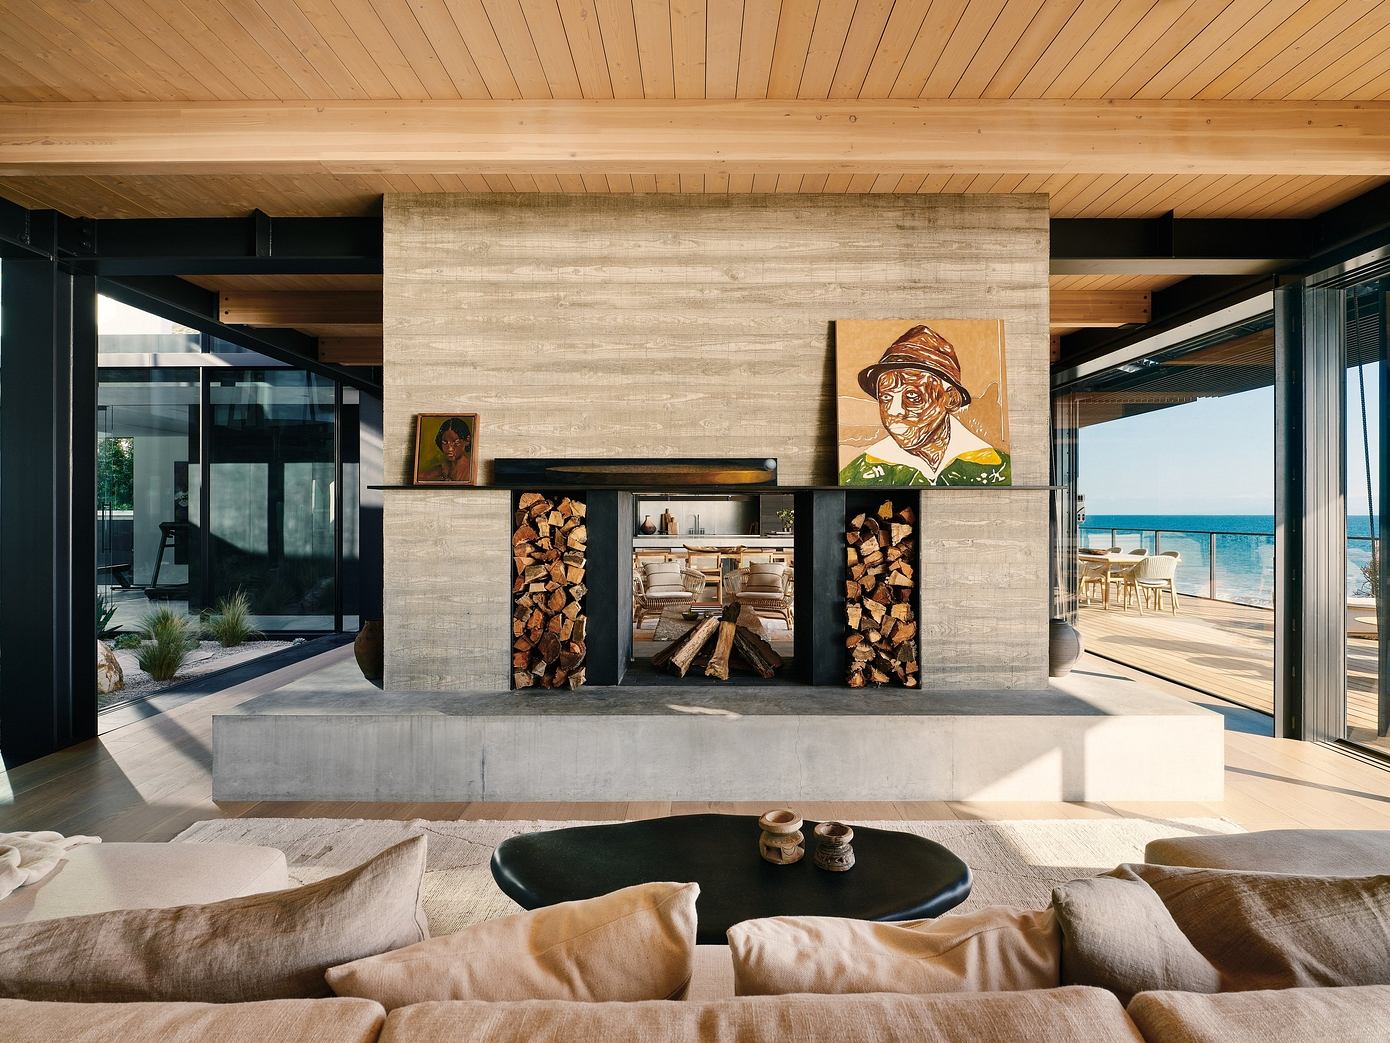 Carbon Beach House: Malibu’s Oceanfront Oasis by Olson Kundig